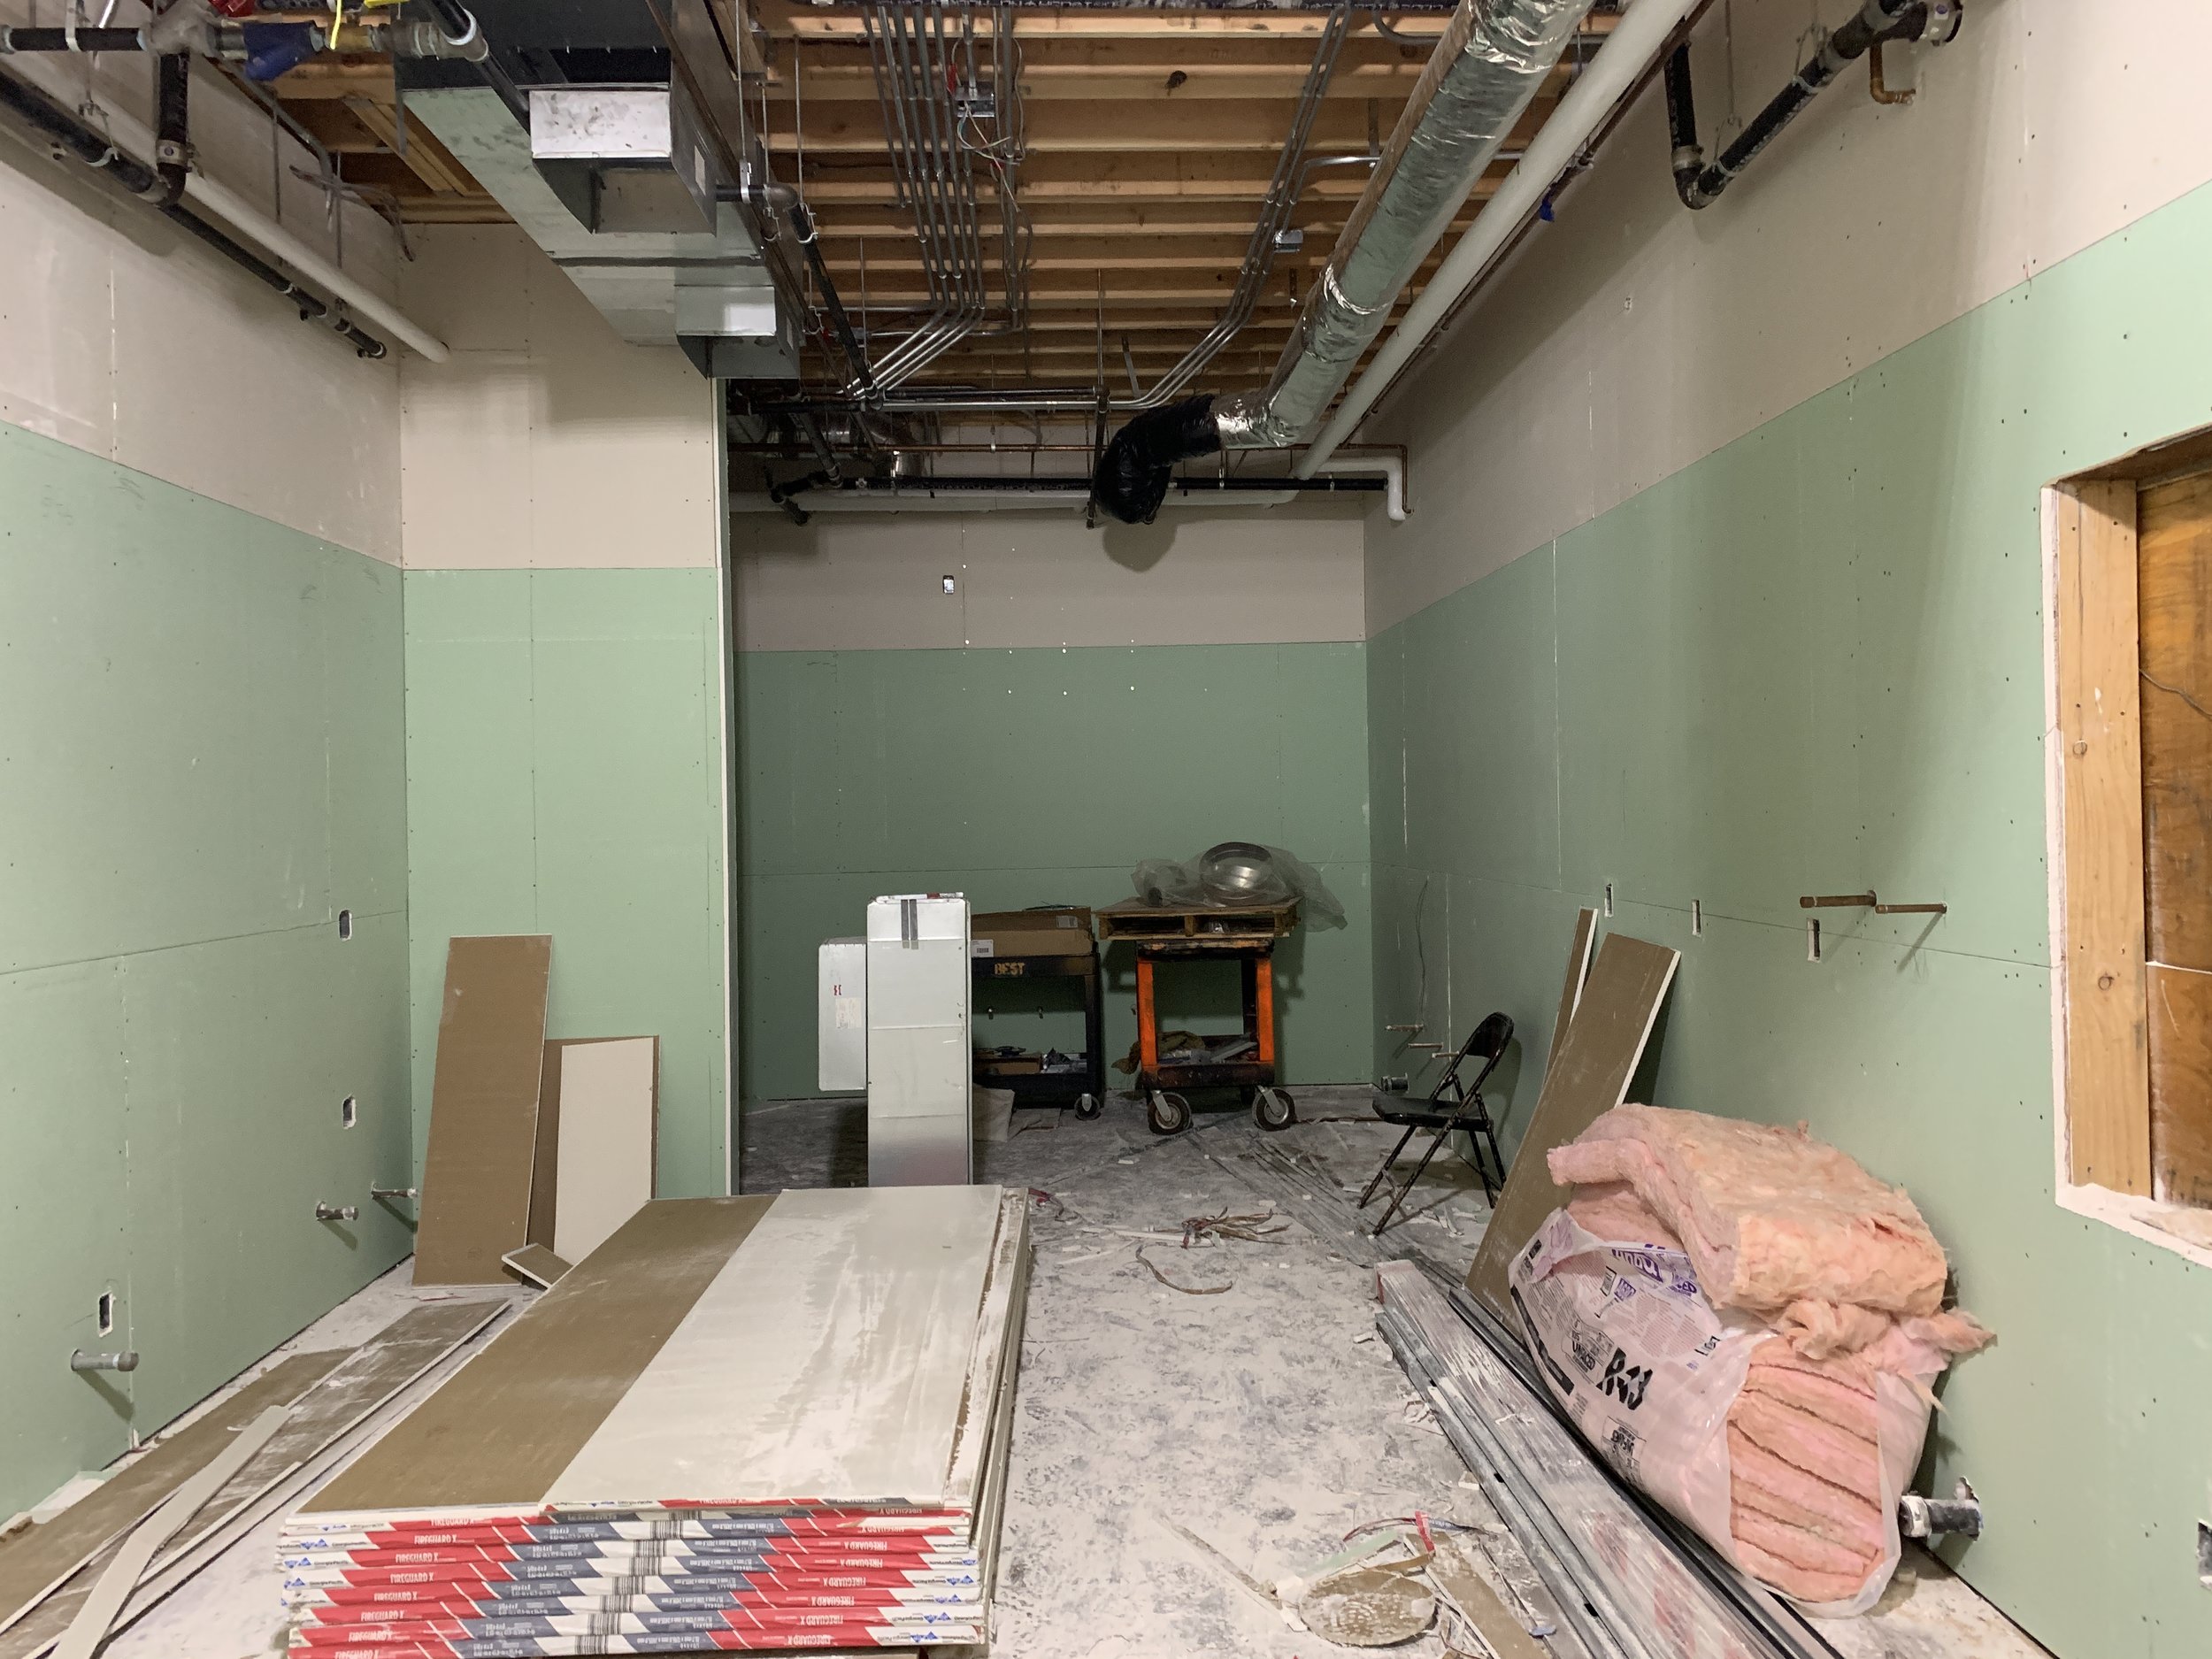 2-27-2019 Kitchen drywall is up